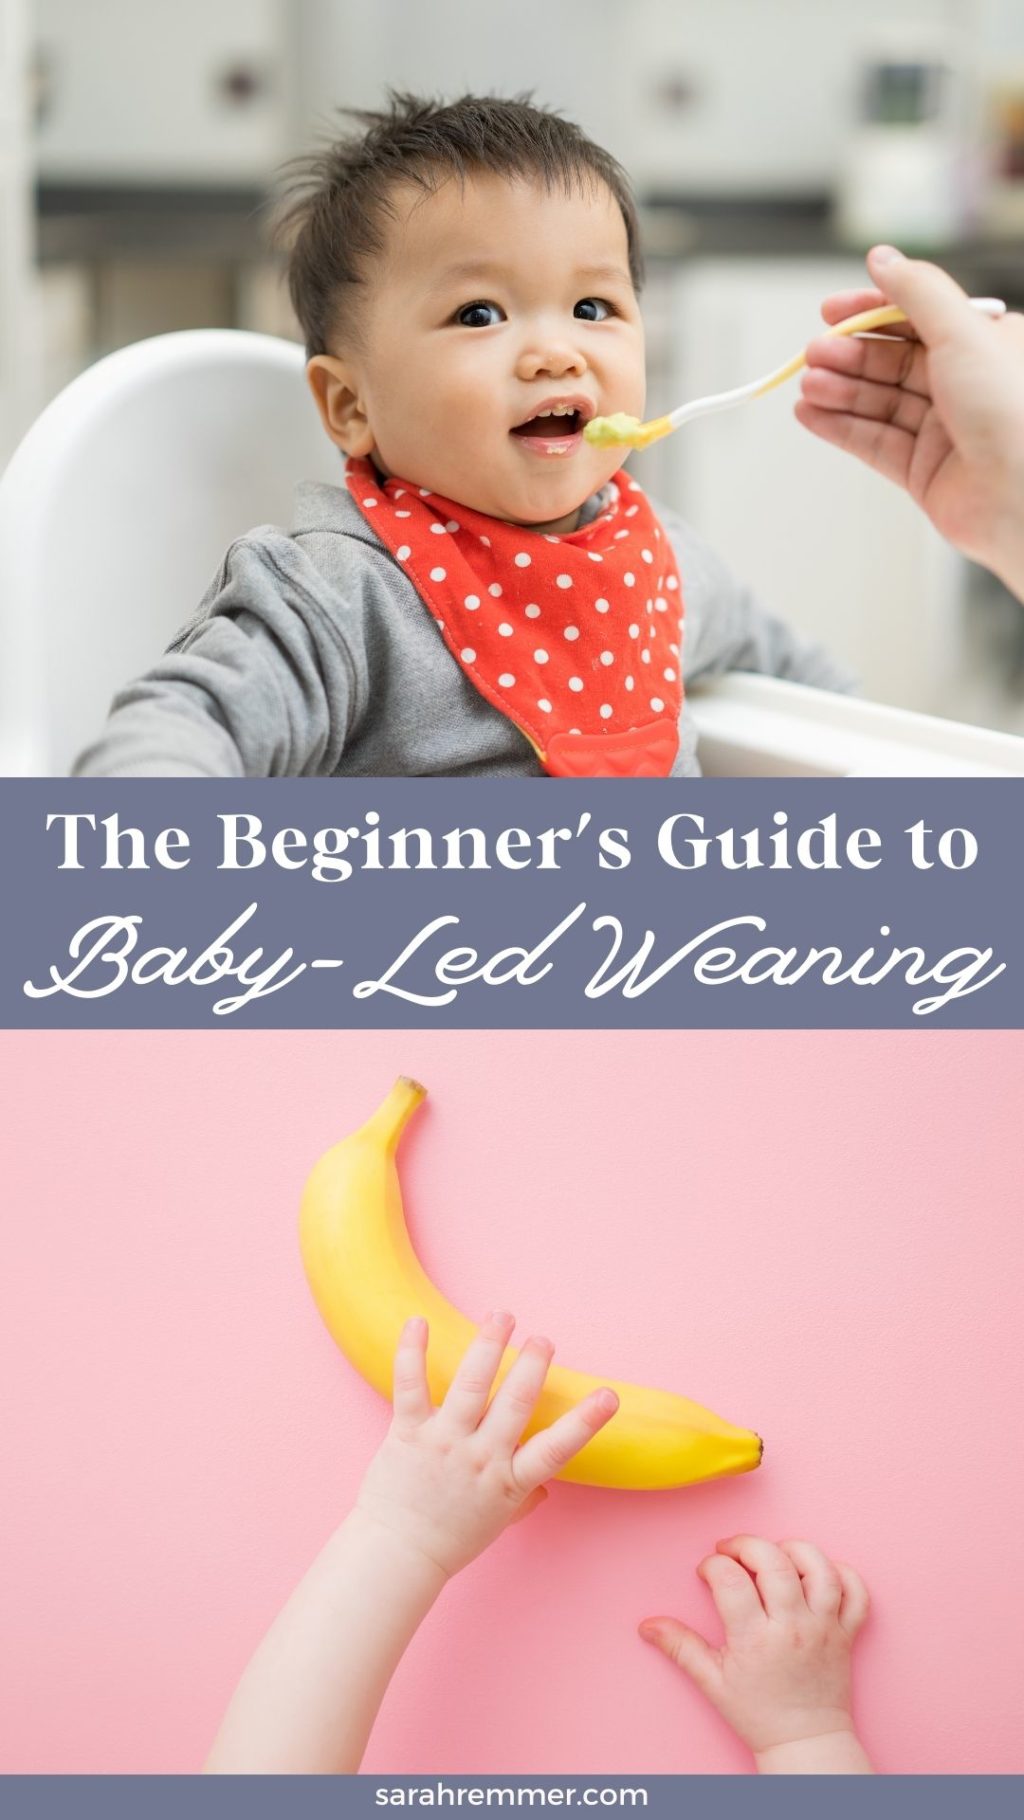 This beginners guide to baby-led weaning is a comprehensive guide that will help feeding newbies learn everything there is to know about this starting solids strategy, why it is registered dietitian-approved, how to implement it, and some nutritious recipes to test out with their babies. 